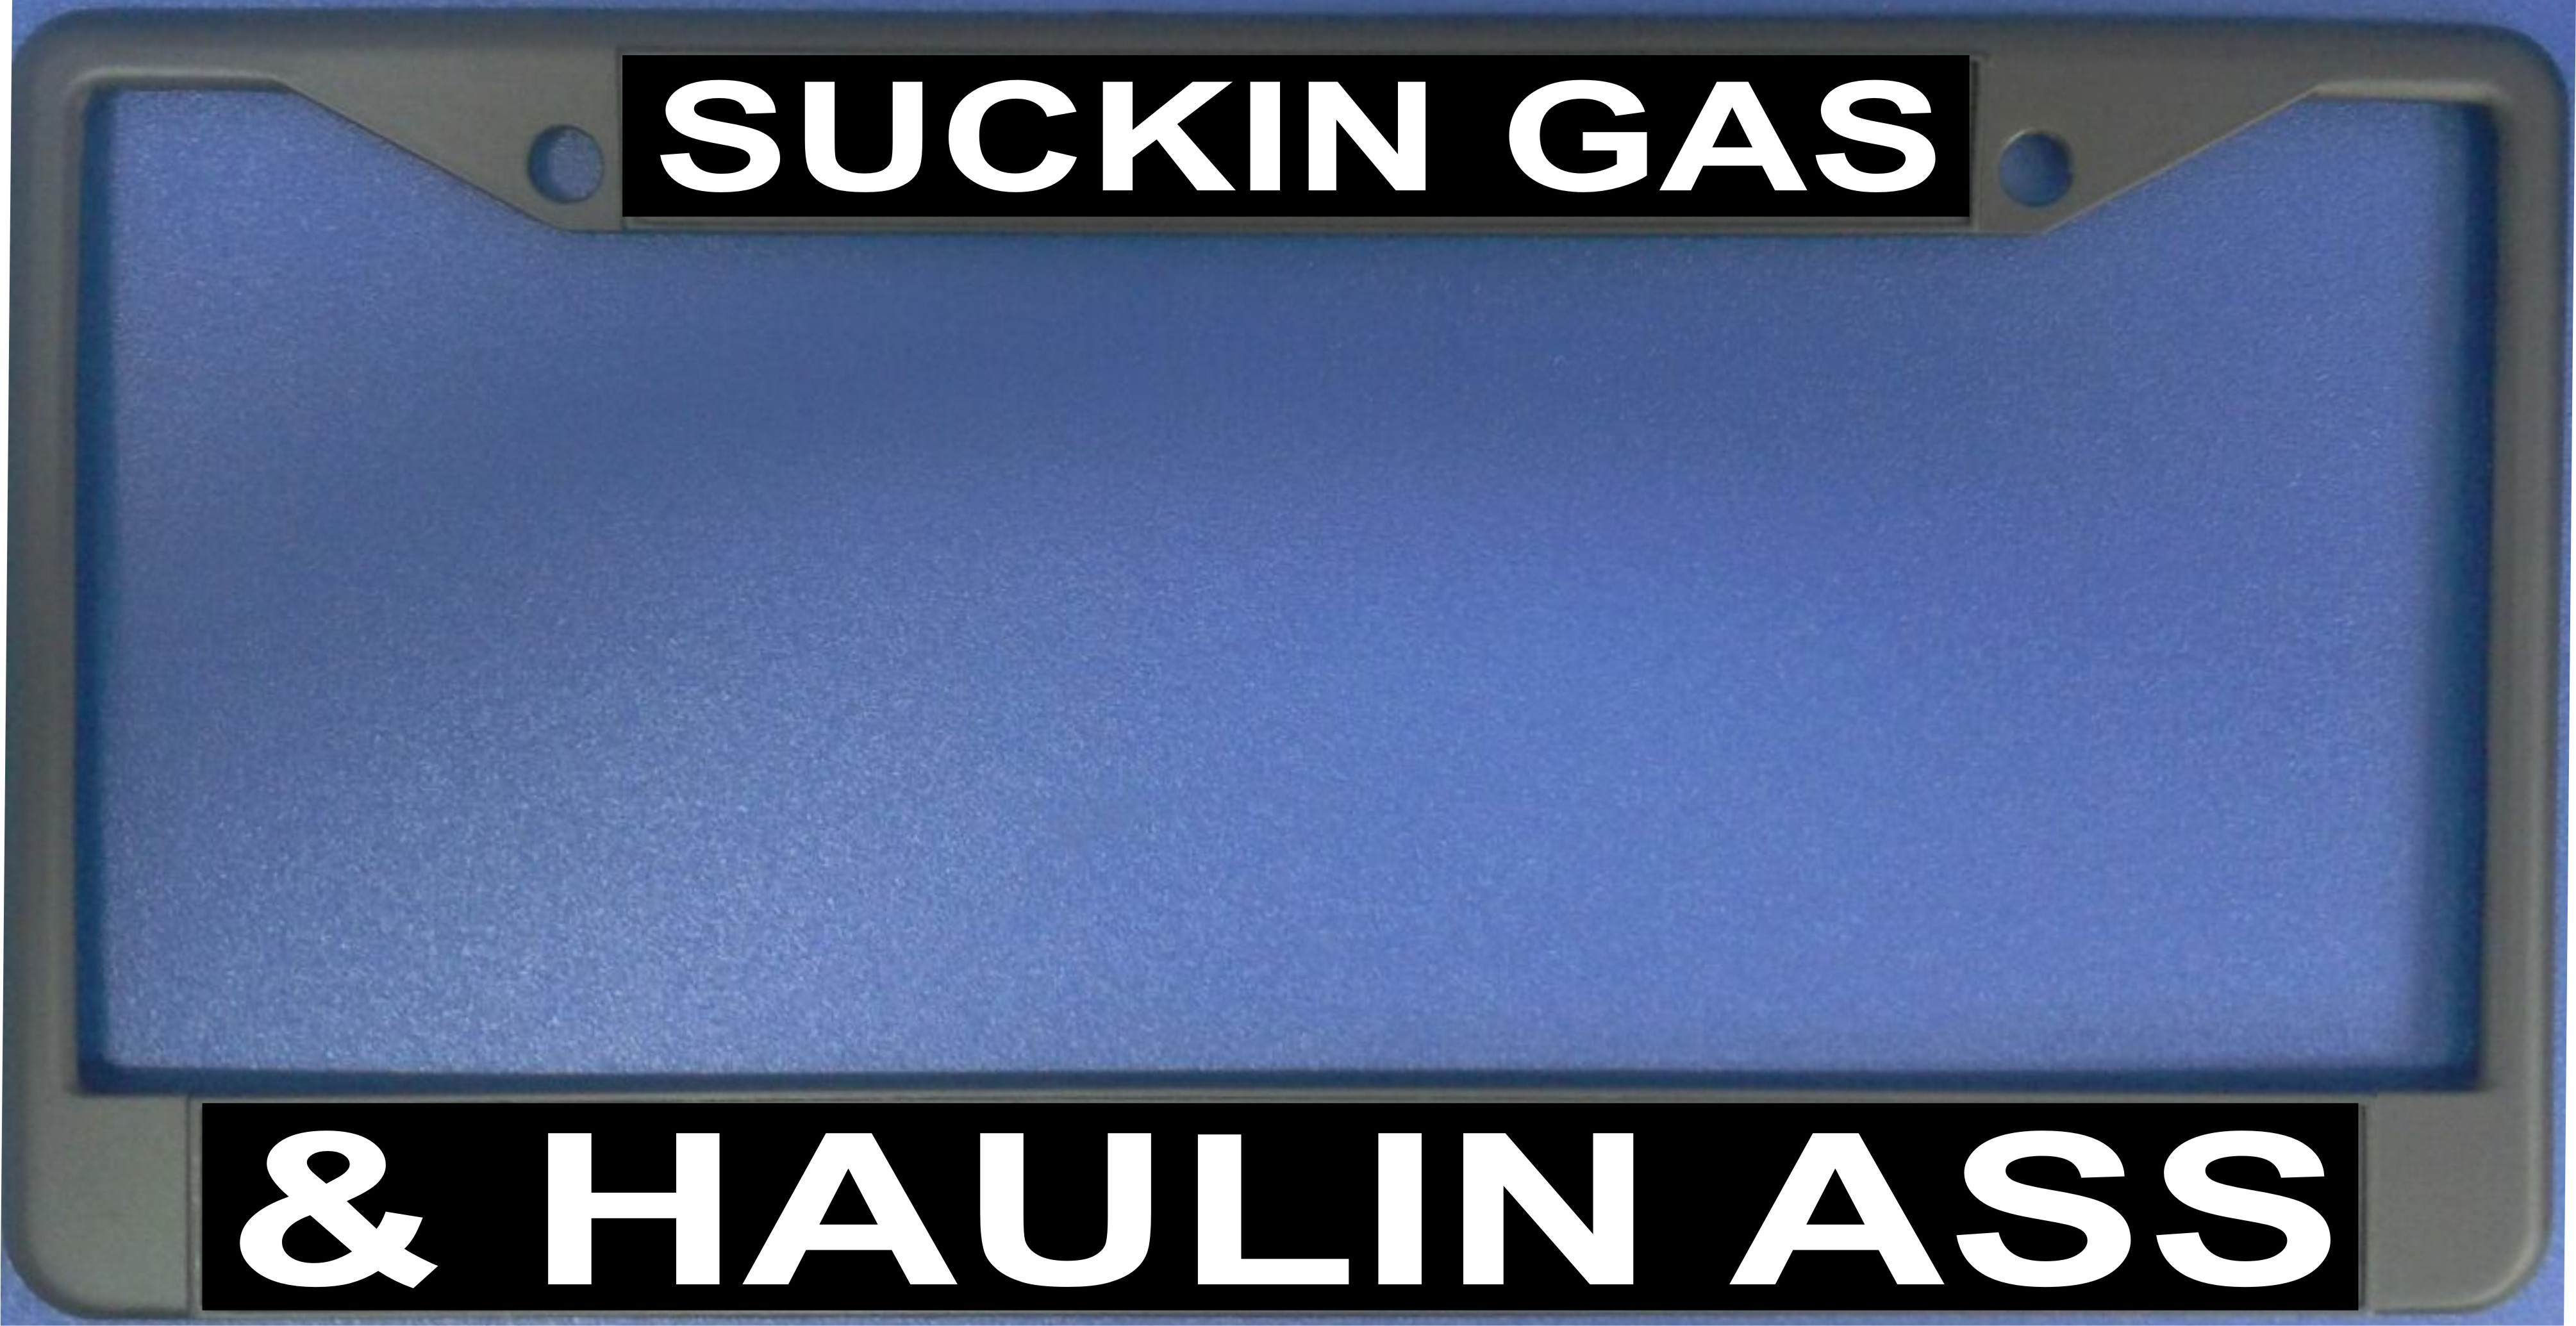 Suckin' Gas and Haulin' A-- License Plate Frame  Free SCREW Caps with this Frame